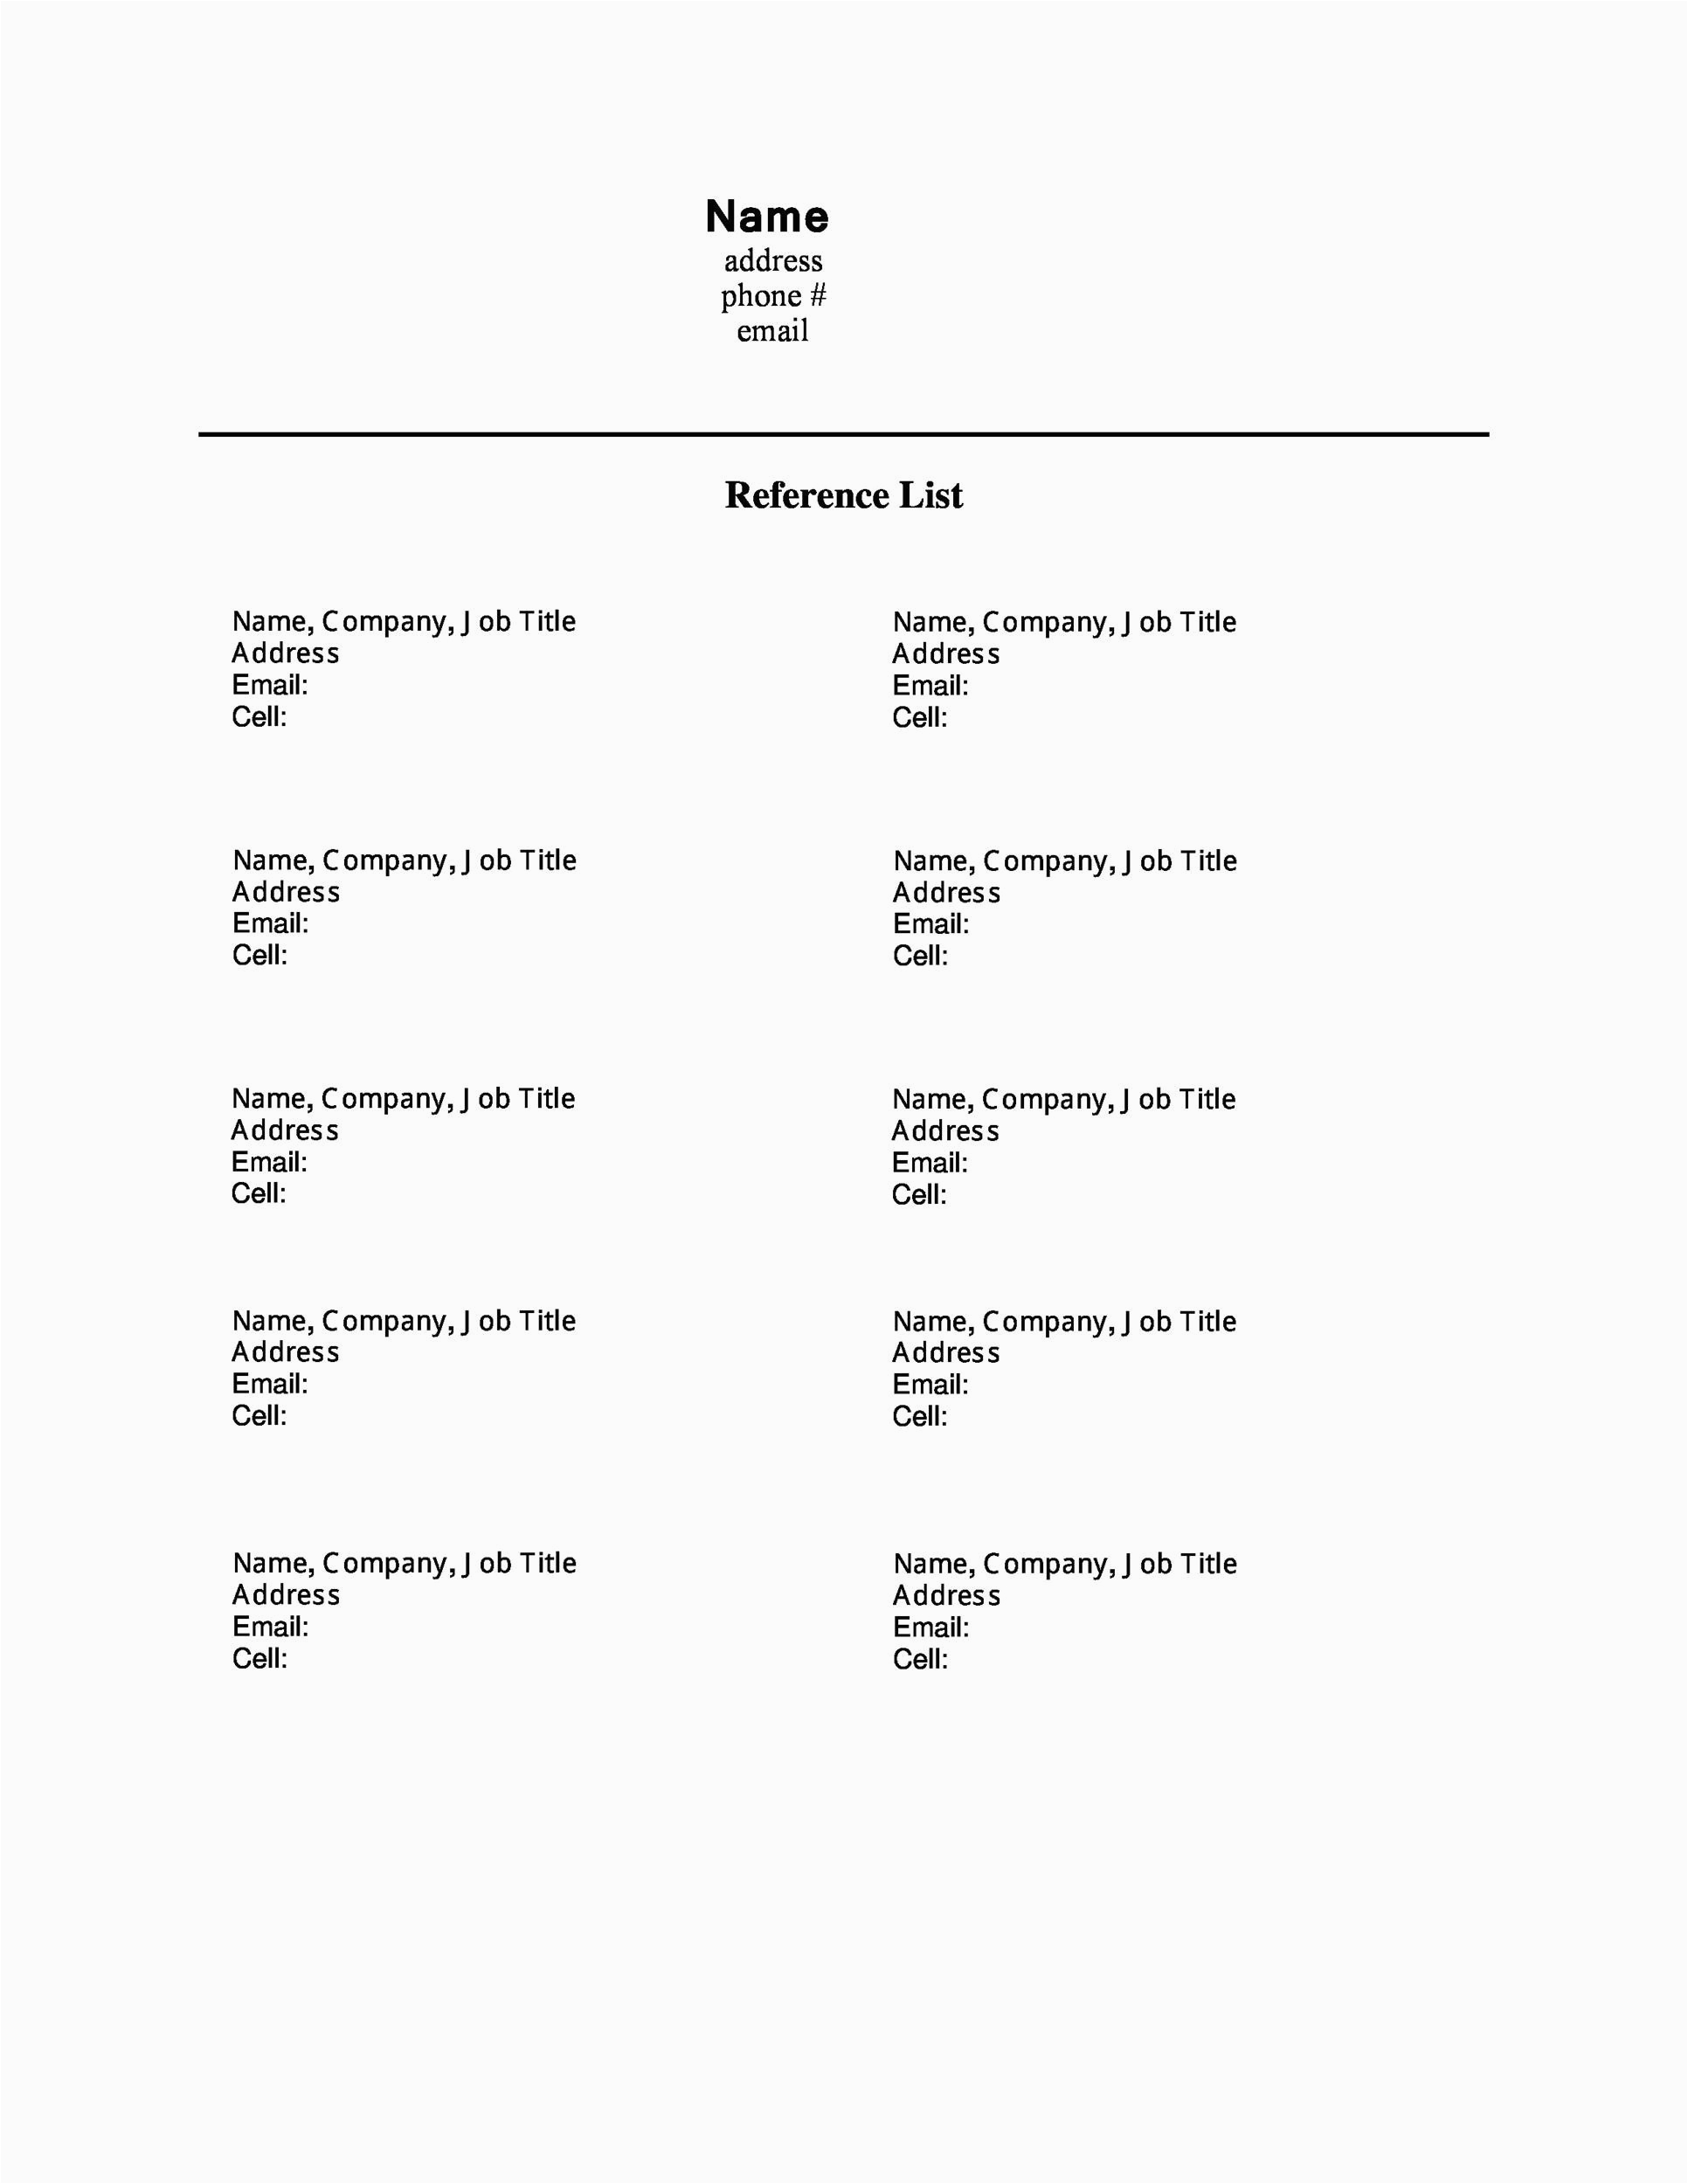 Free Reference List Template for Resume Resume Reference List Template Resume Template Database